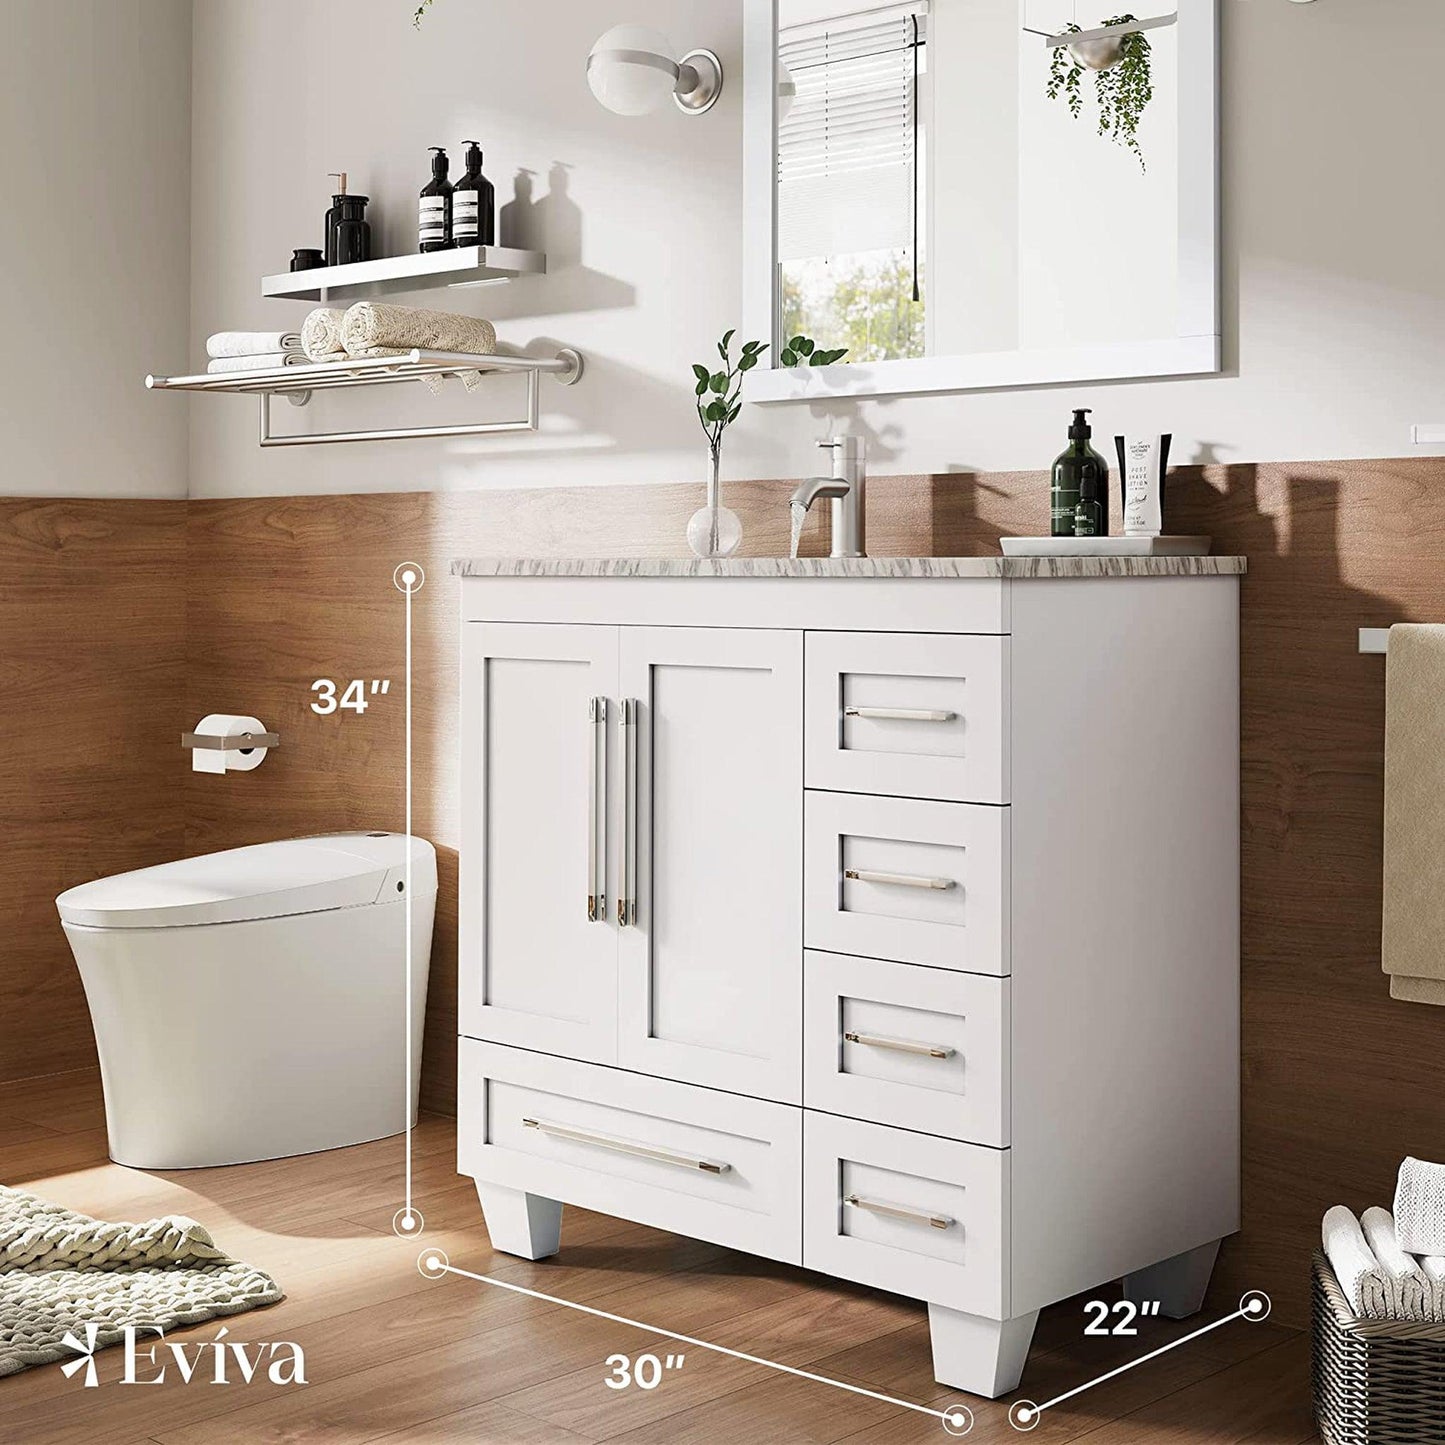 Eviva Loon 30" x 34" White Freestanding Bathroom Vanity With Carrara Marble Countertop and Undermount Porcelain Sink